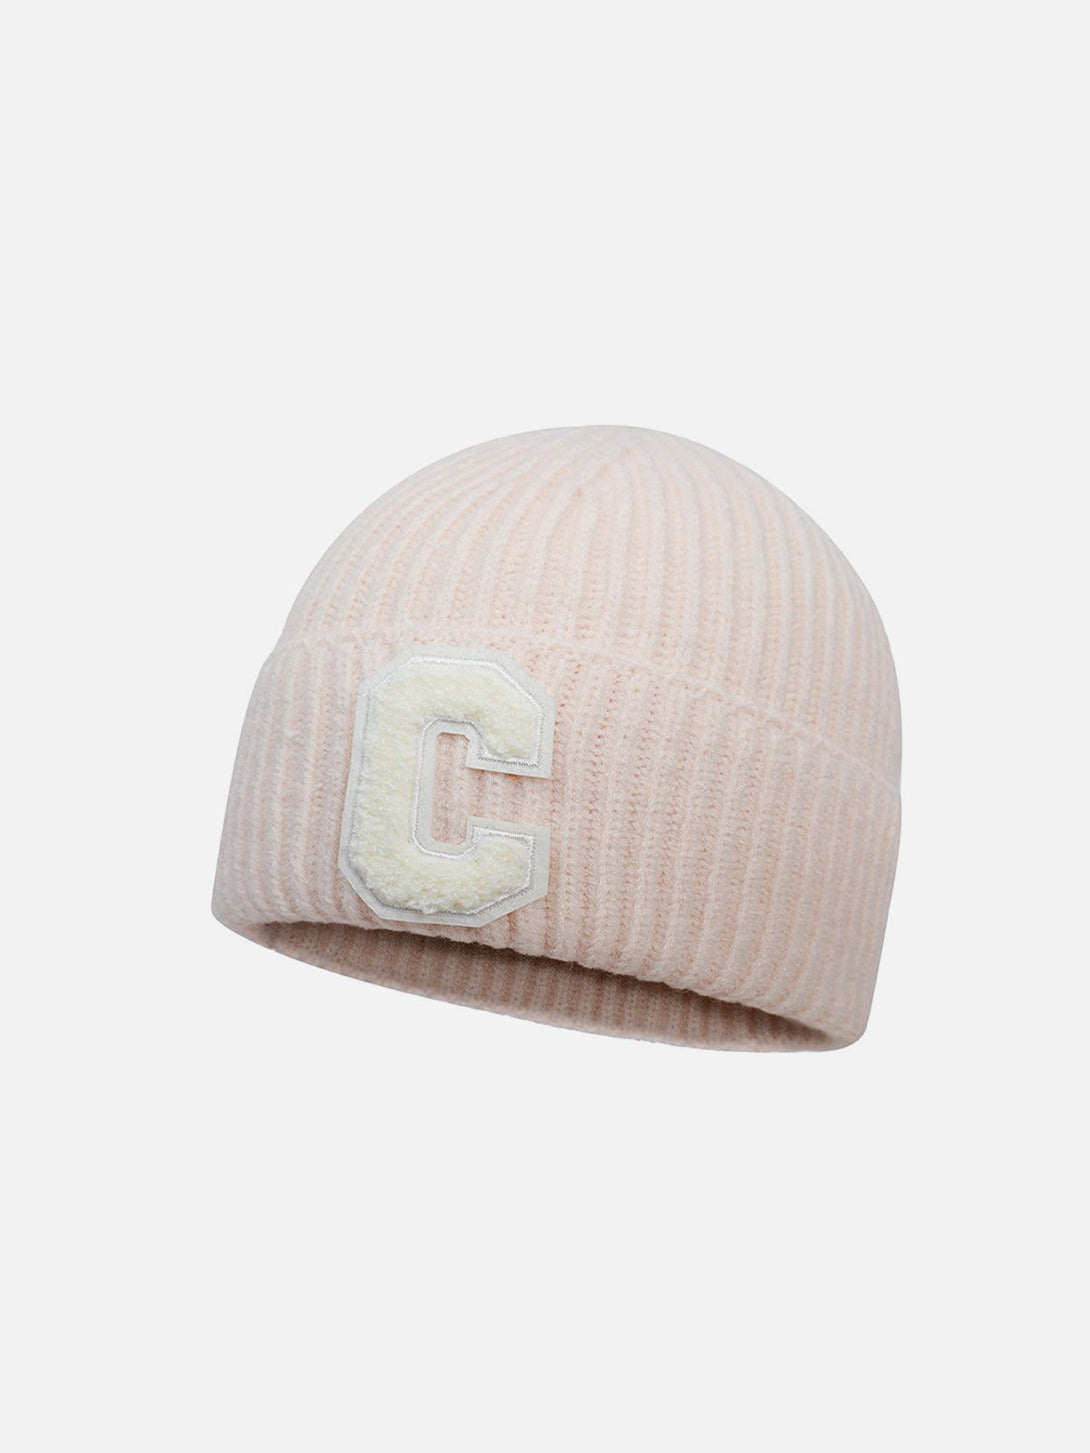 Levefly - Warm Curled "C" Letter Knitted Hat - Streetwear Fashion - levefly.com